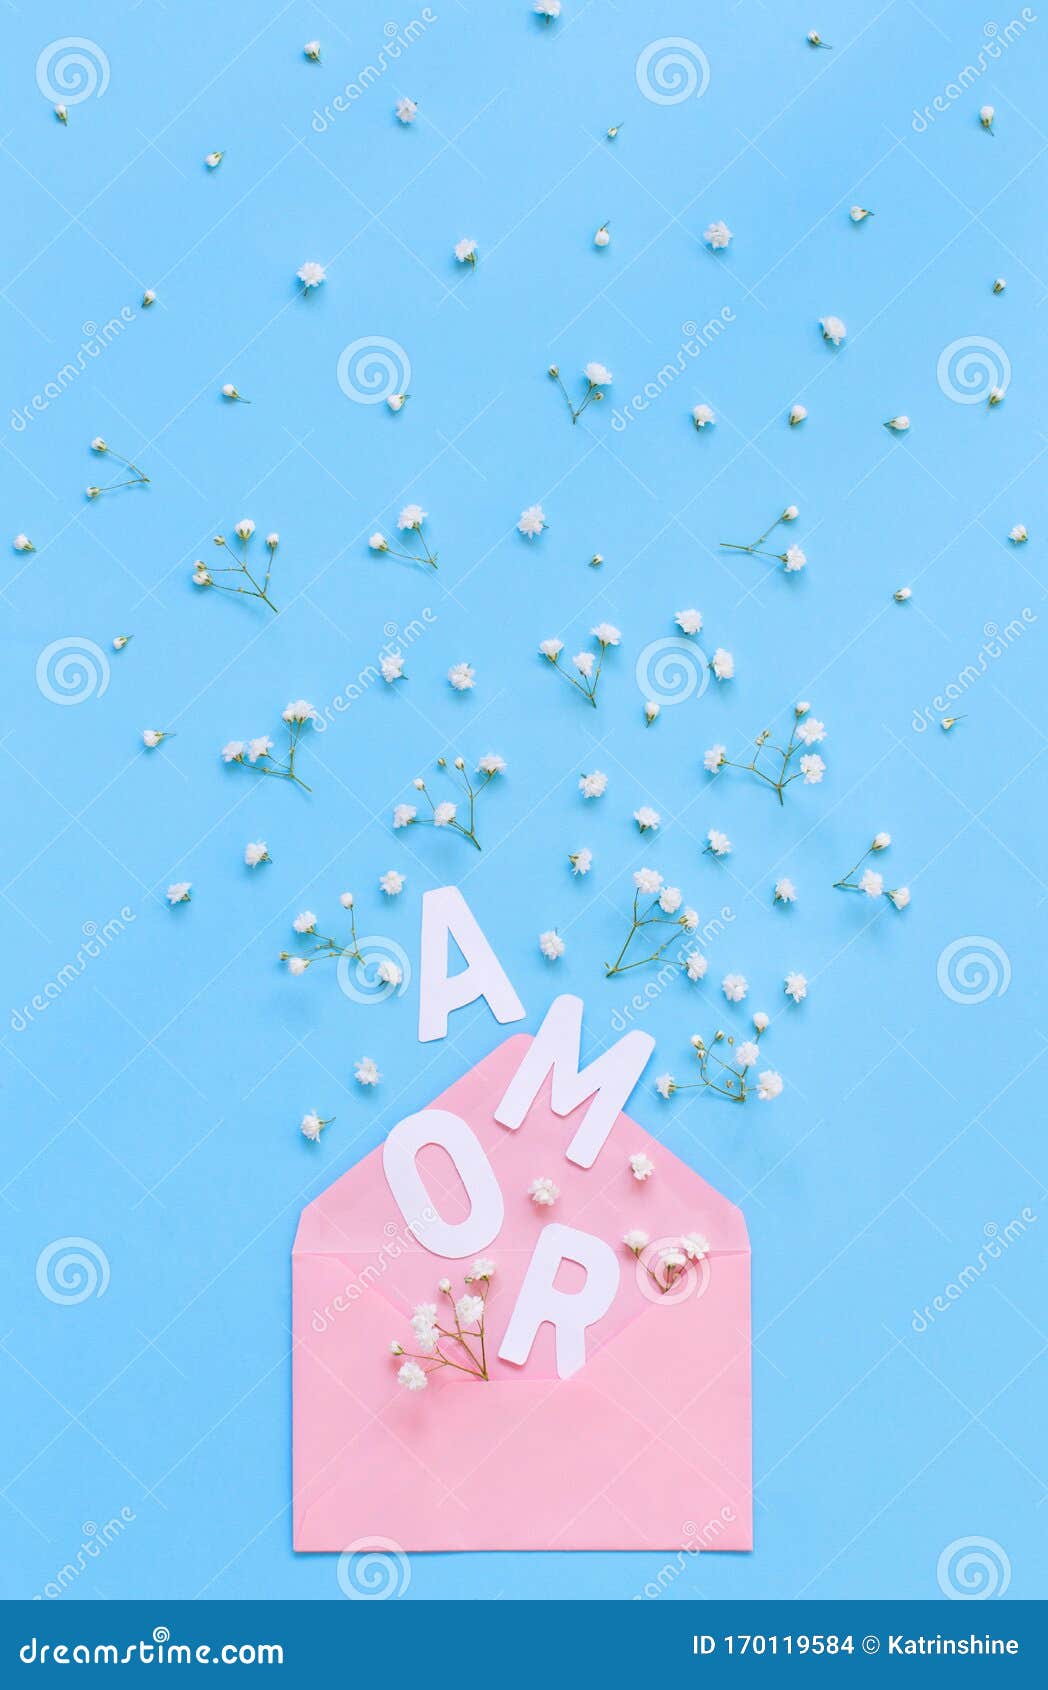 flowers, pink envelope and word amor on a light blue background